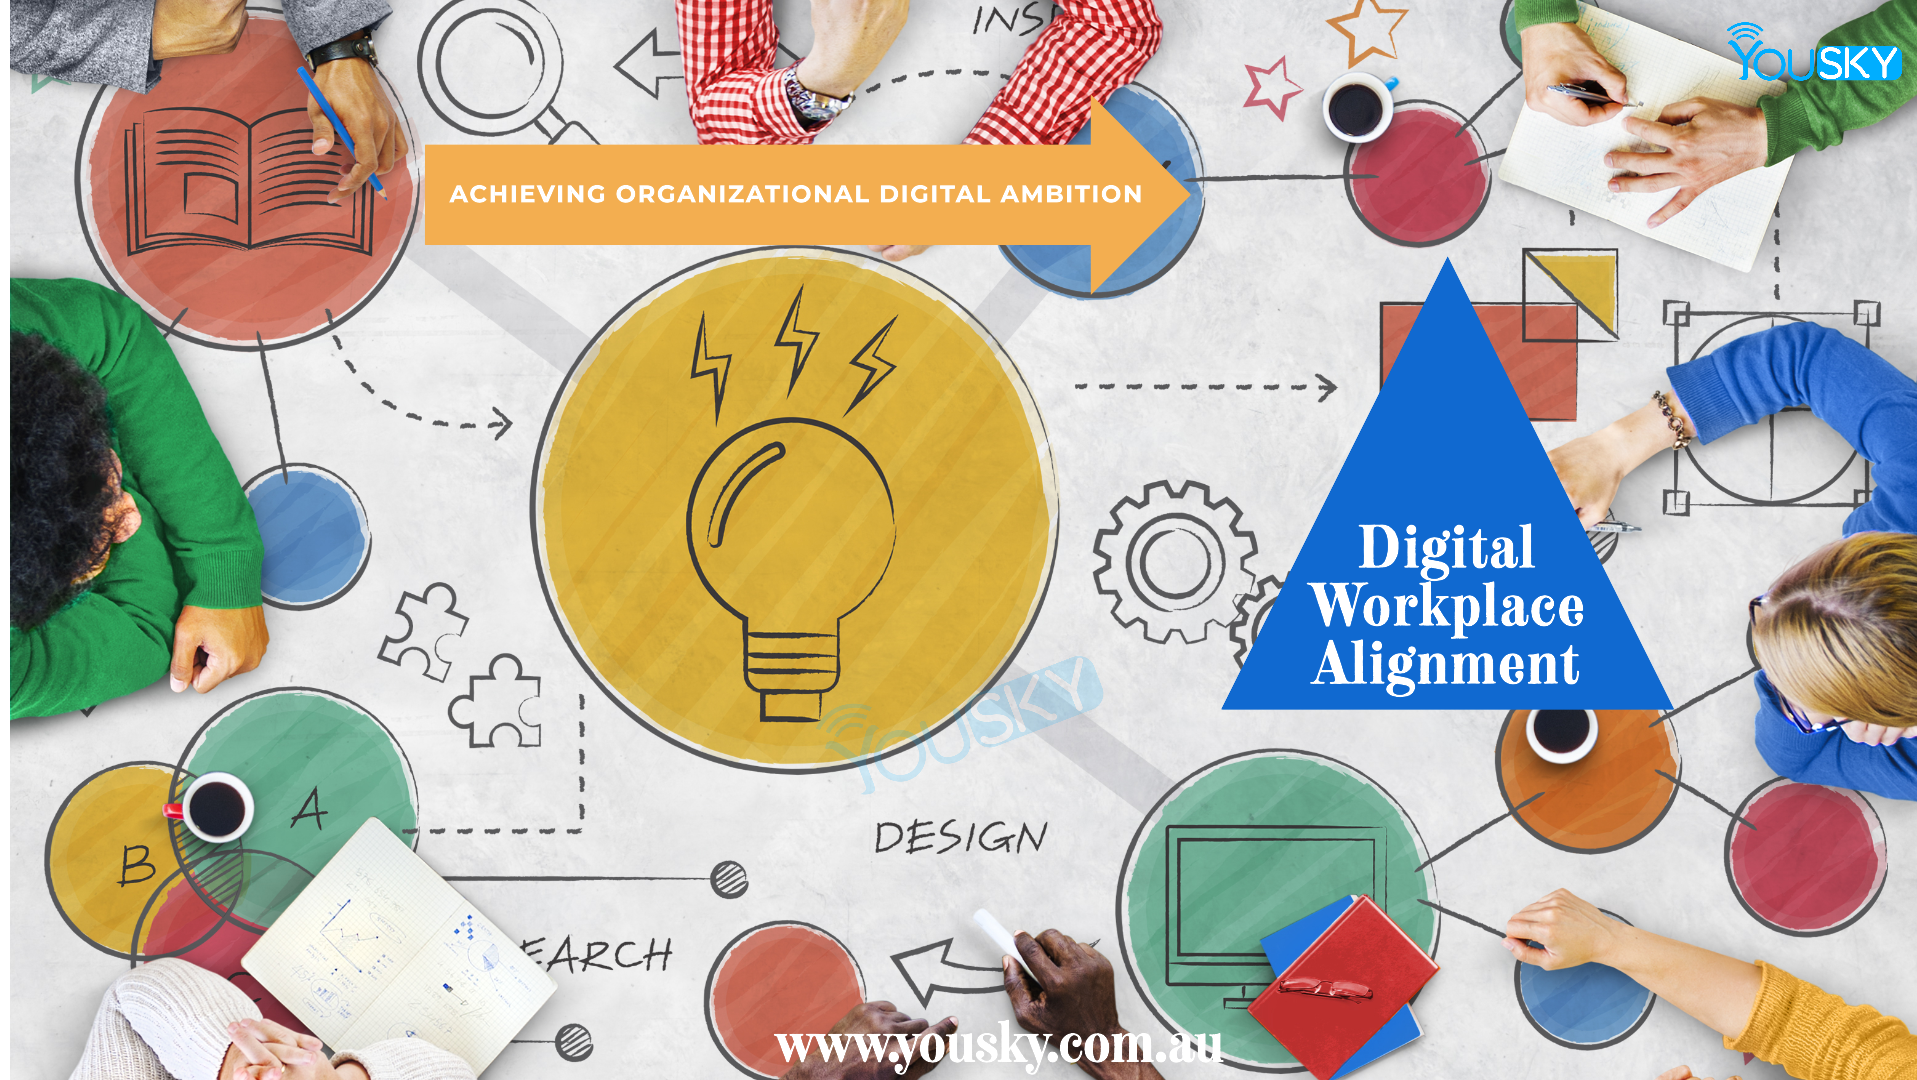 Is Your Digital Workplace Aligned to Achieve Your Organisation’s Digital Ambition?